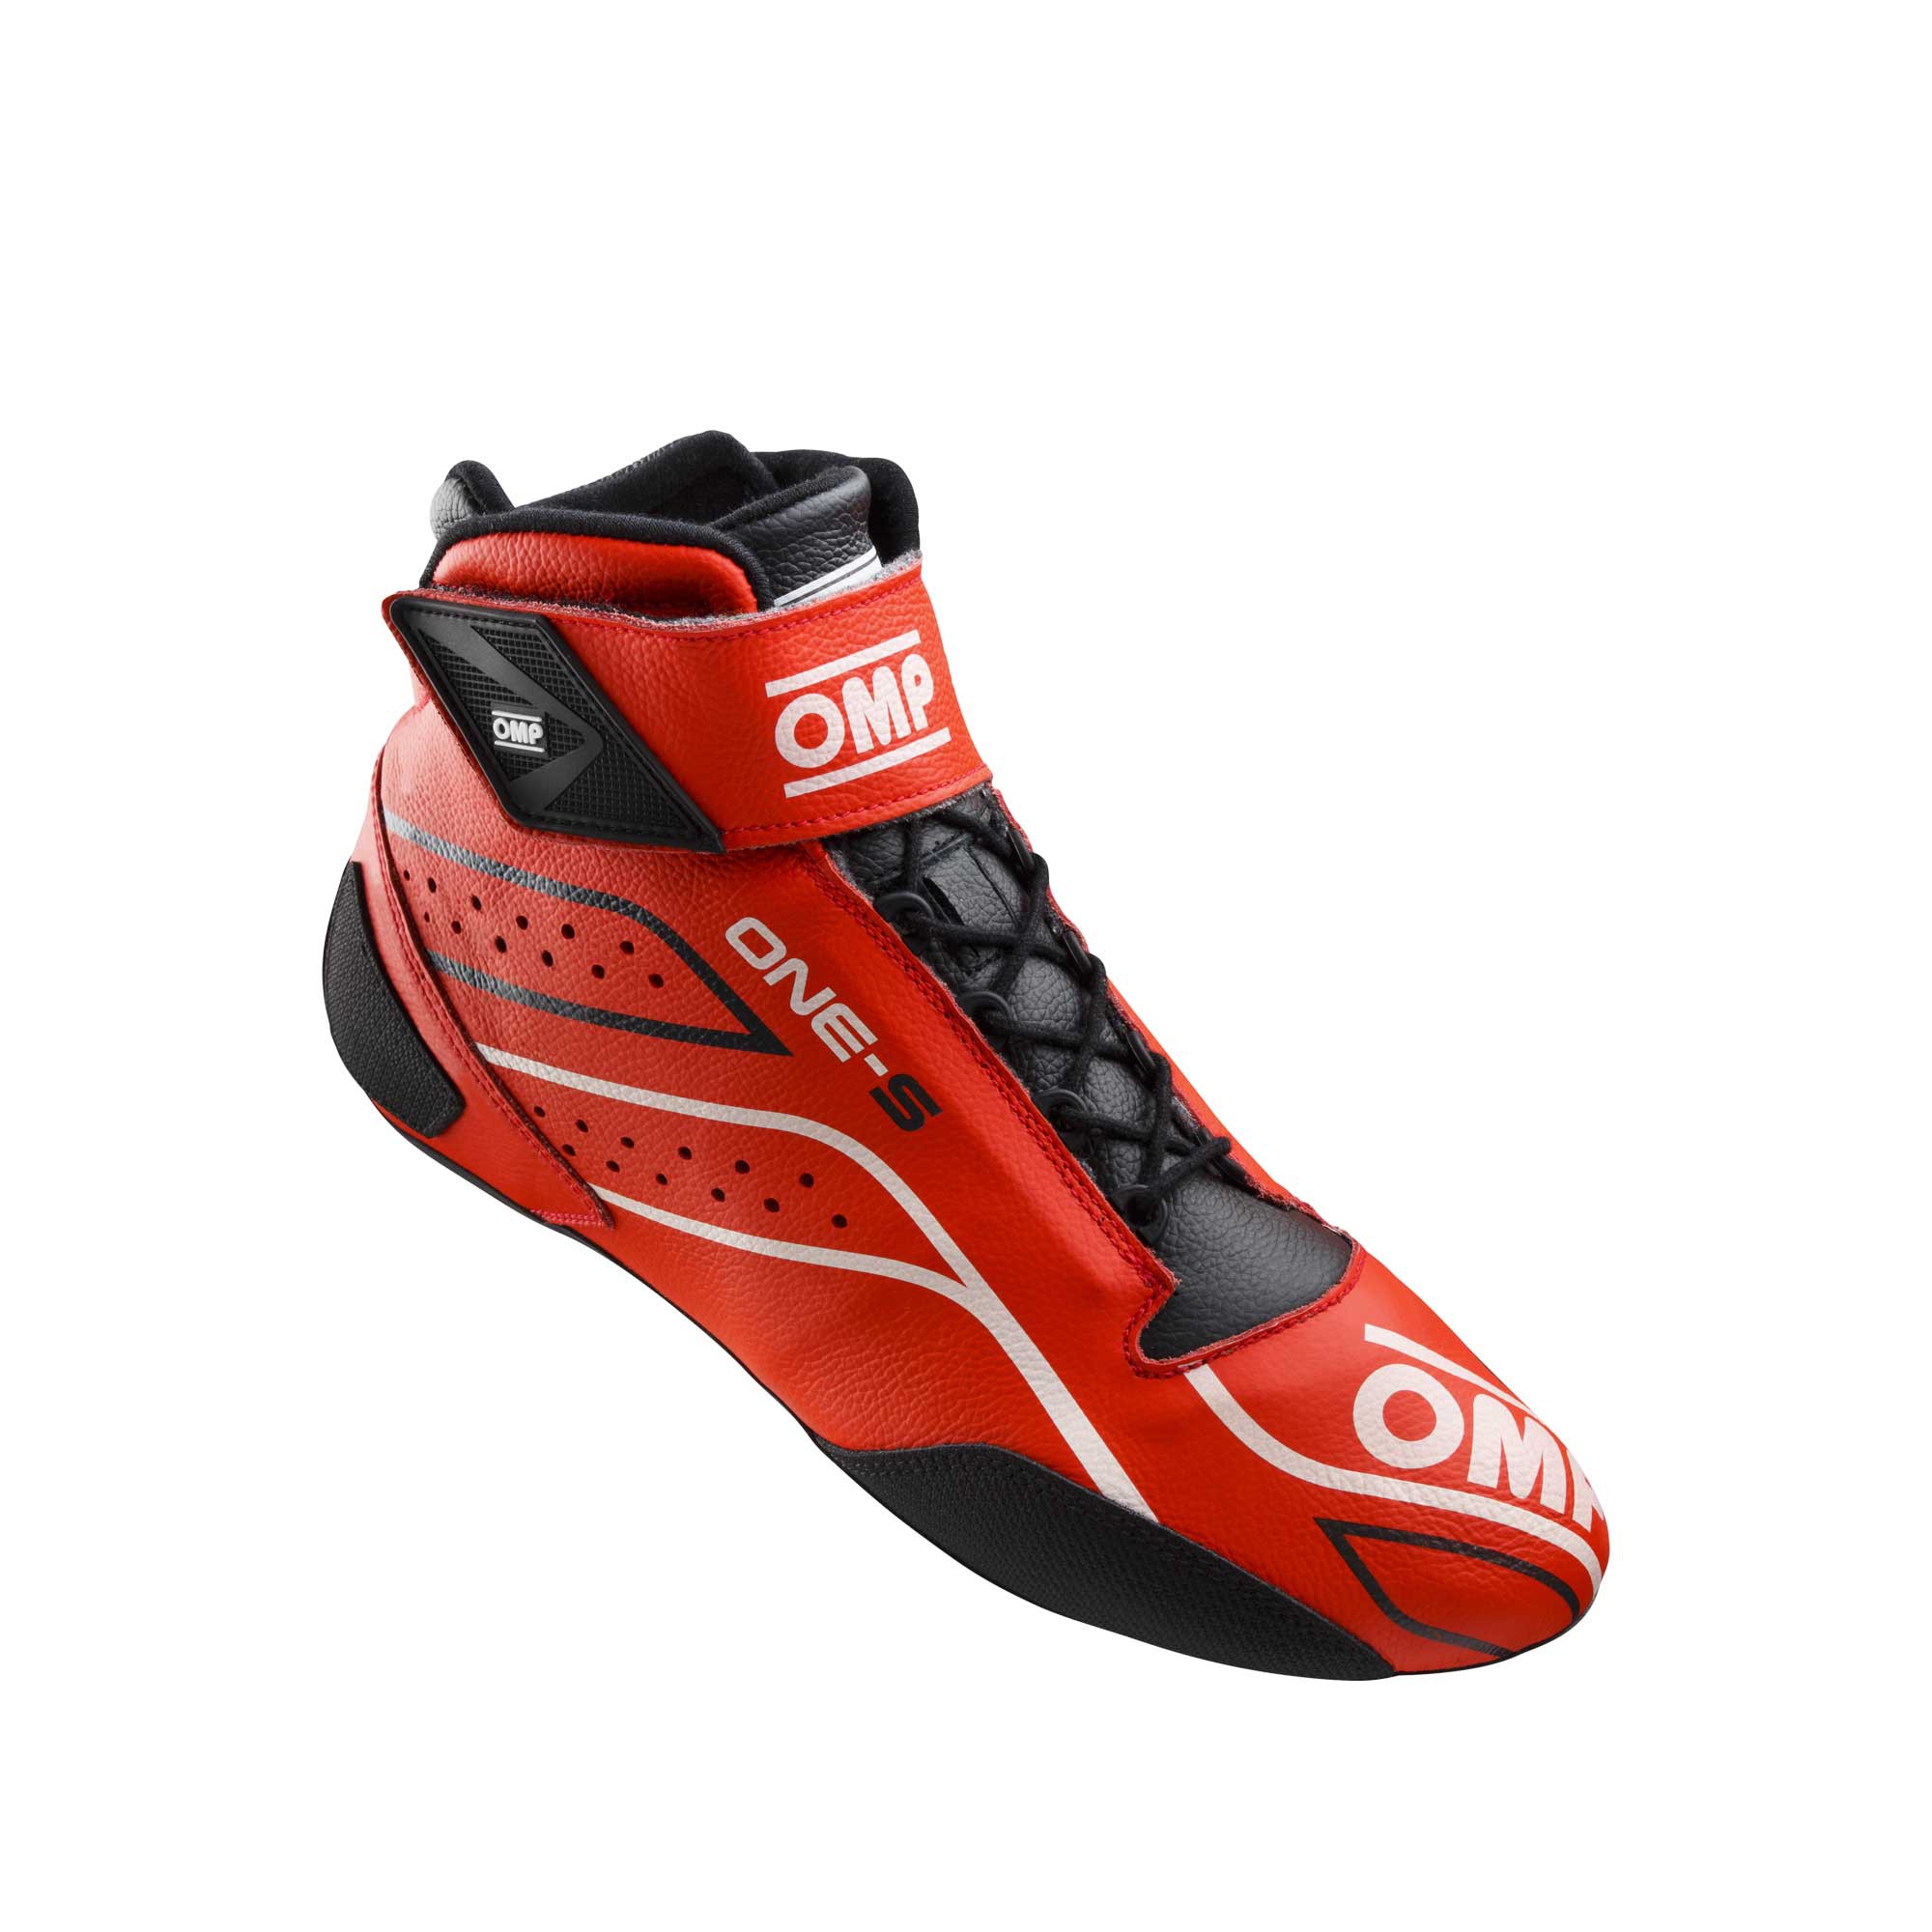 ONE-S SHOES RED/BLACK/WHITE SIZE 37 FIA 8856-2018